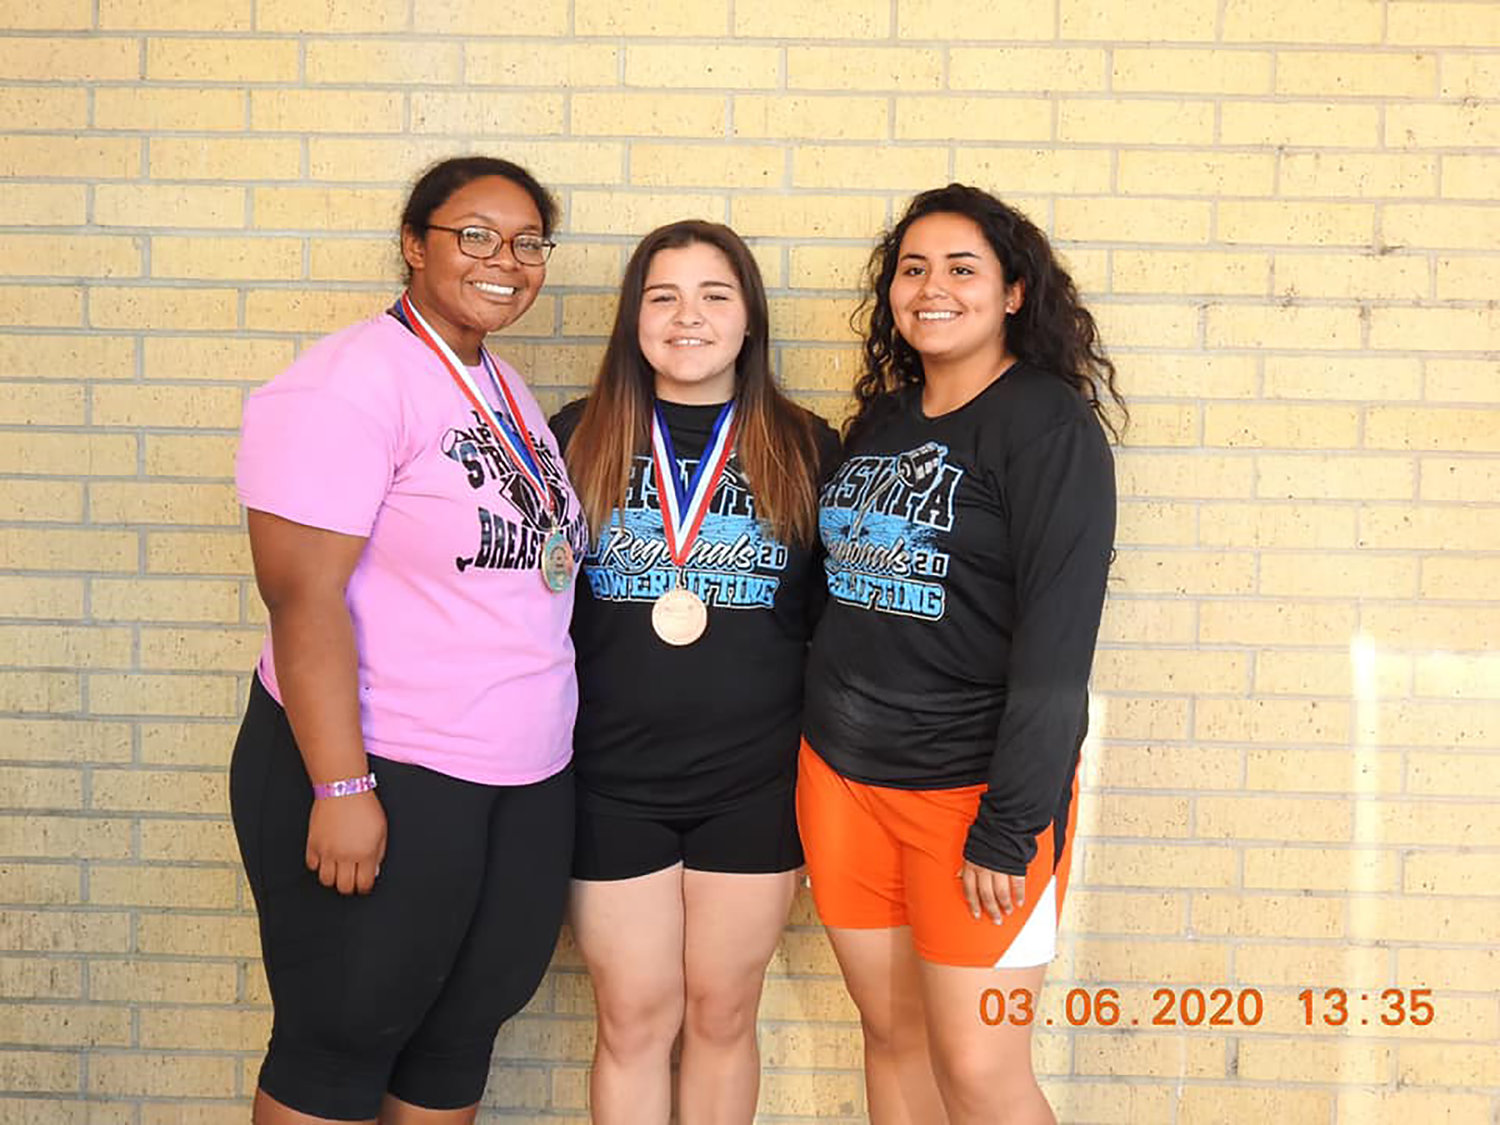 Pictured are the Gonzales Lady Apaches lifters who competed in the regional powerlifting meet last week. Sydney Clack (left) is the regional powerlifting champion in her weight class. Graycee Center (middle) placed fifth in her weight class and Trinity Aguero (right) placed ninth in her weight class.